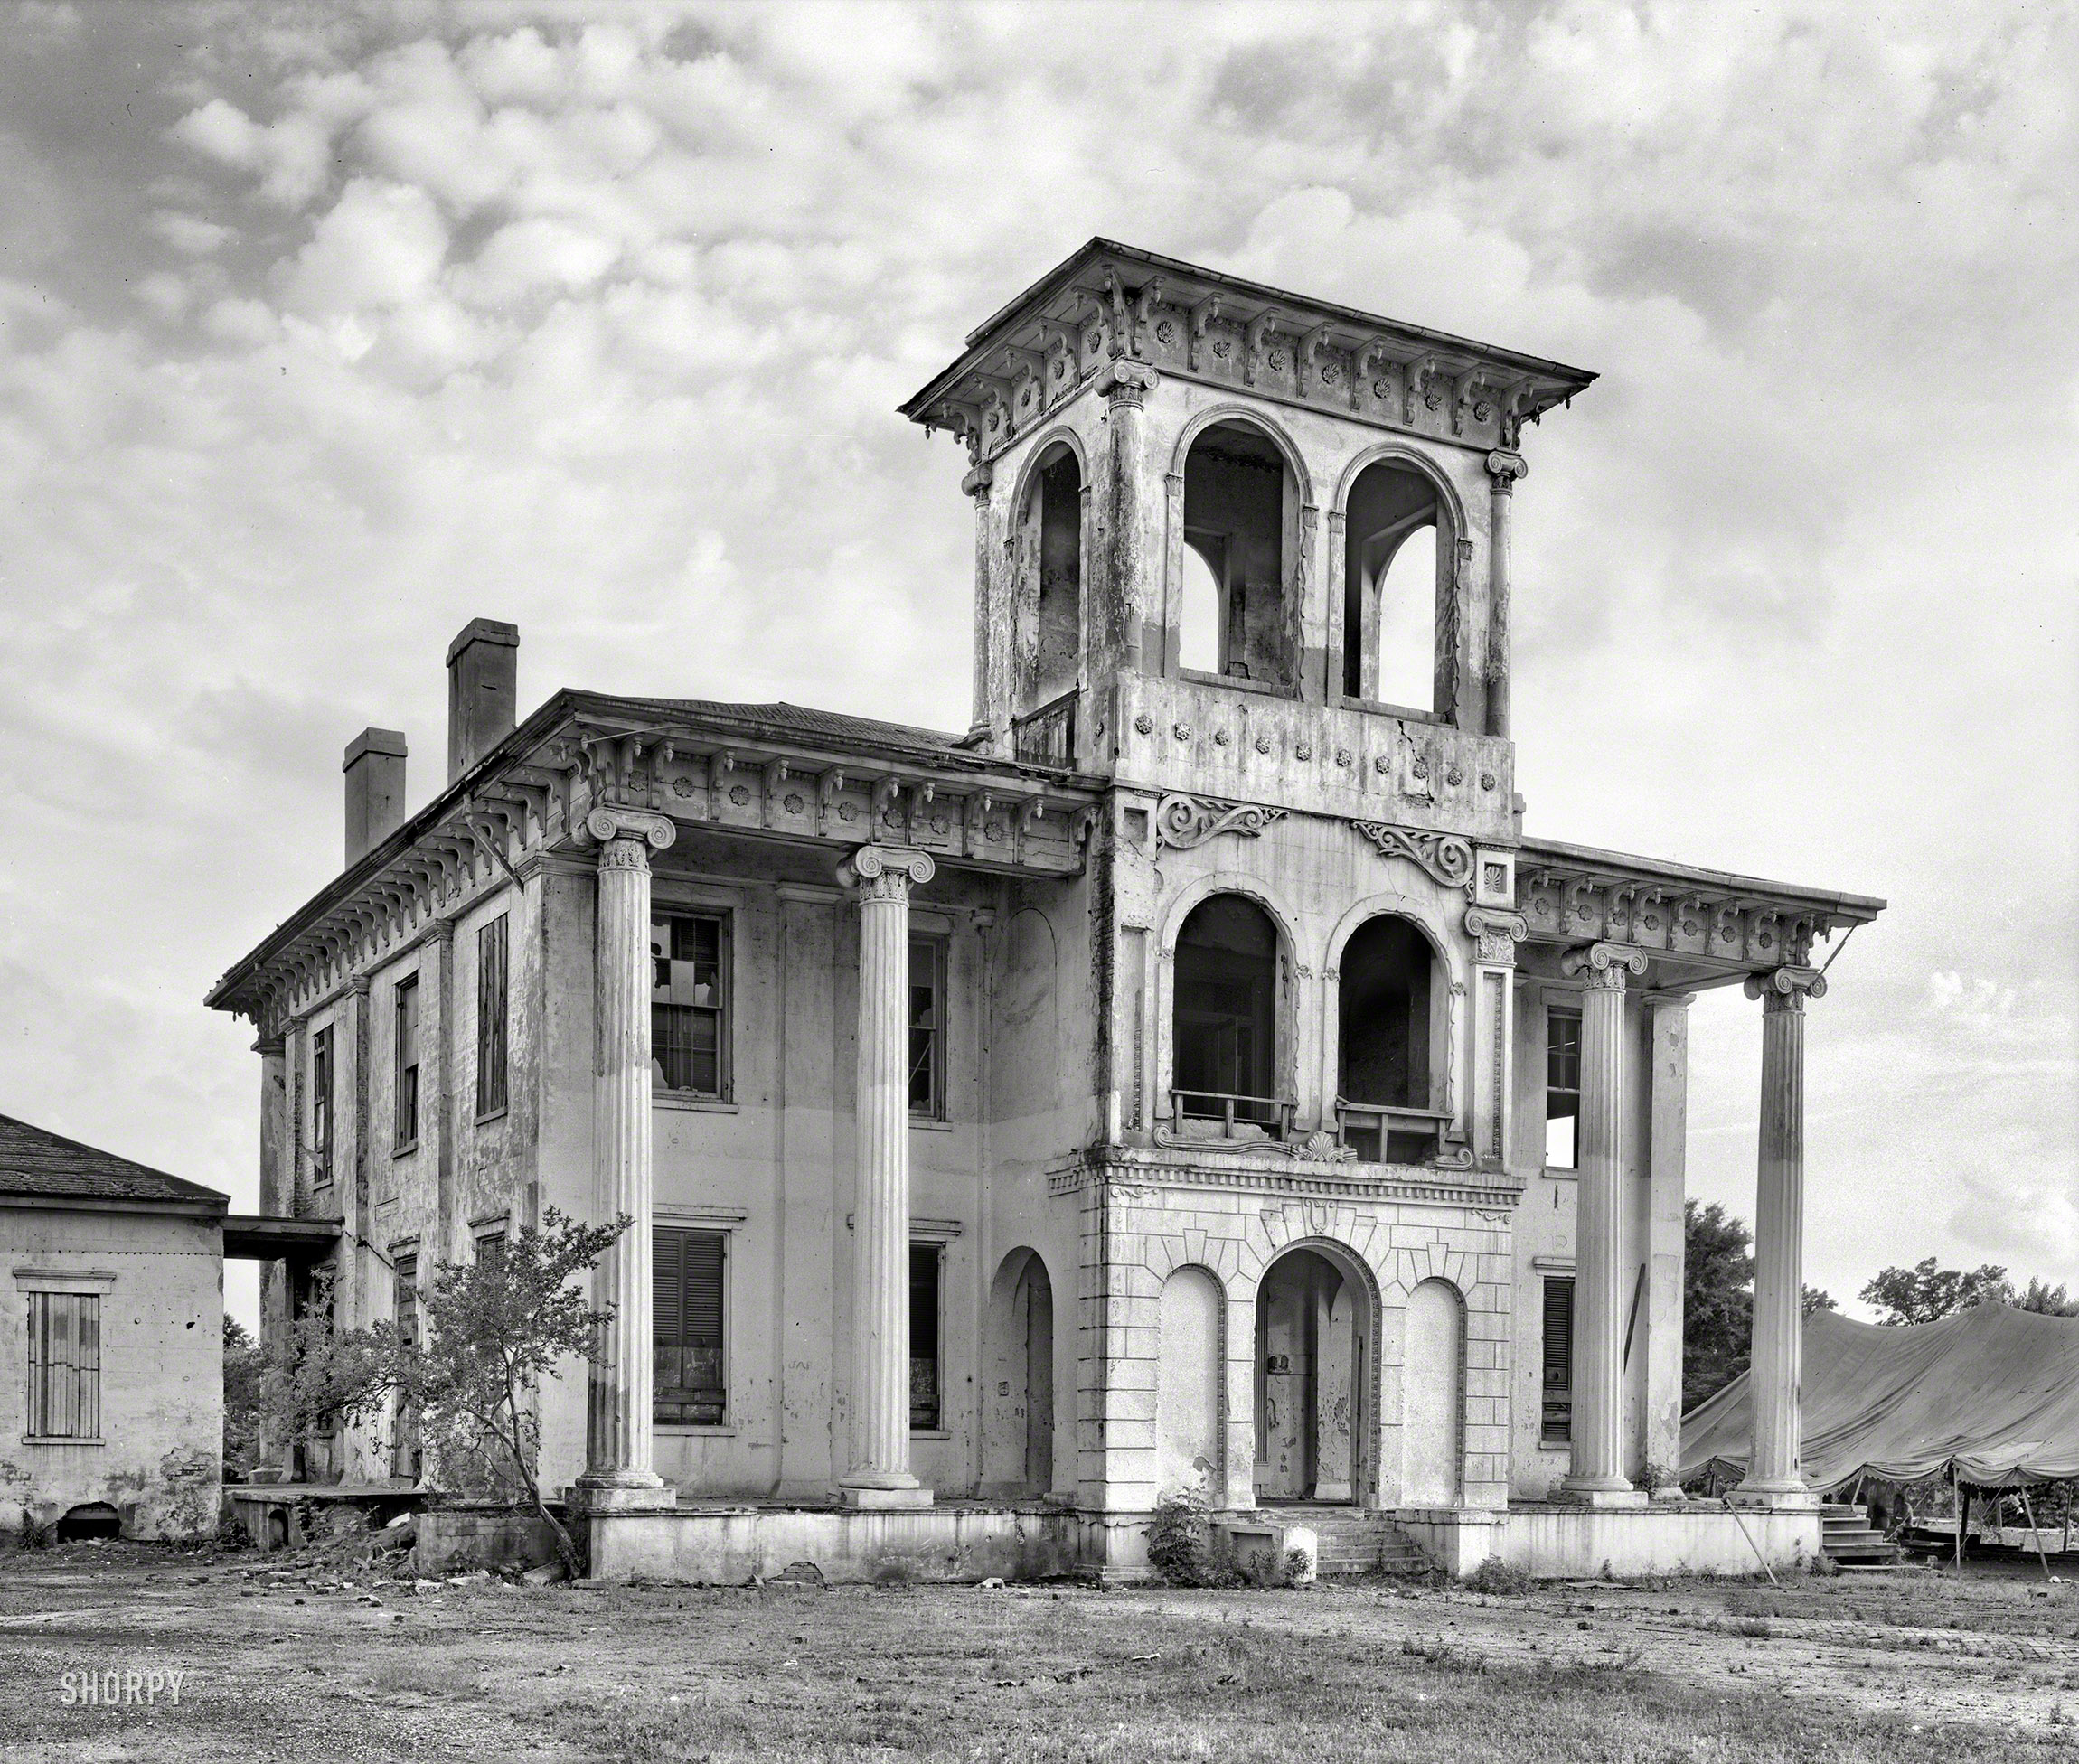 1939. Tuscaloosa, Alabama. "Drish House, 23rd Avenue & 18th. Brick and stucco built with slave labor ca. 1825-1832. Originally a plantation house, later used as public school." 8x10 negative by Frances Benjamin Johnston. View full size.